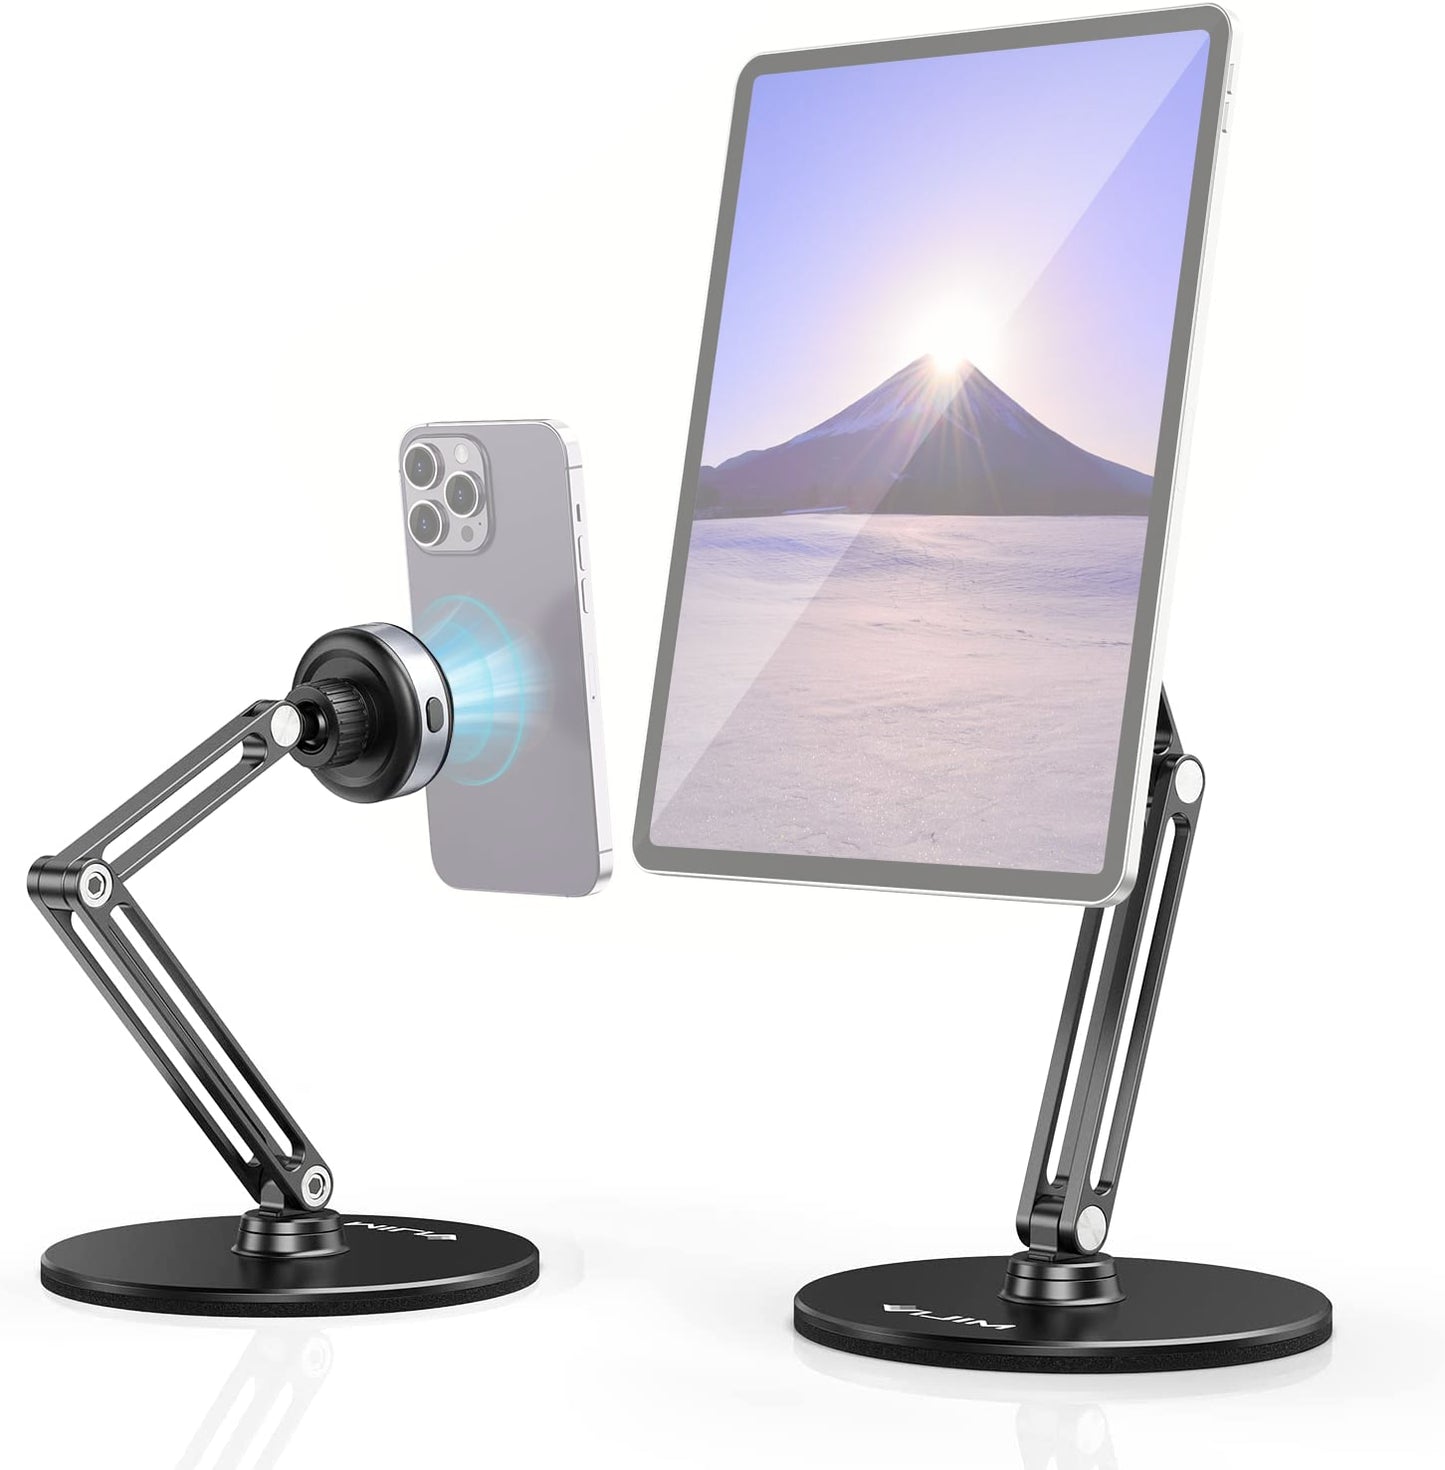 Vijim by Ulanzi HP-007 Smart Vacuum Suction Cup Desktop Stand with 1Kg Load Capacity, 360° Rotation Adjustment, Foldable Design for Phone and Tablet | 3277